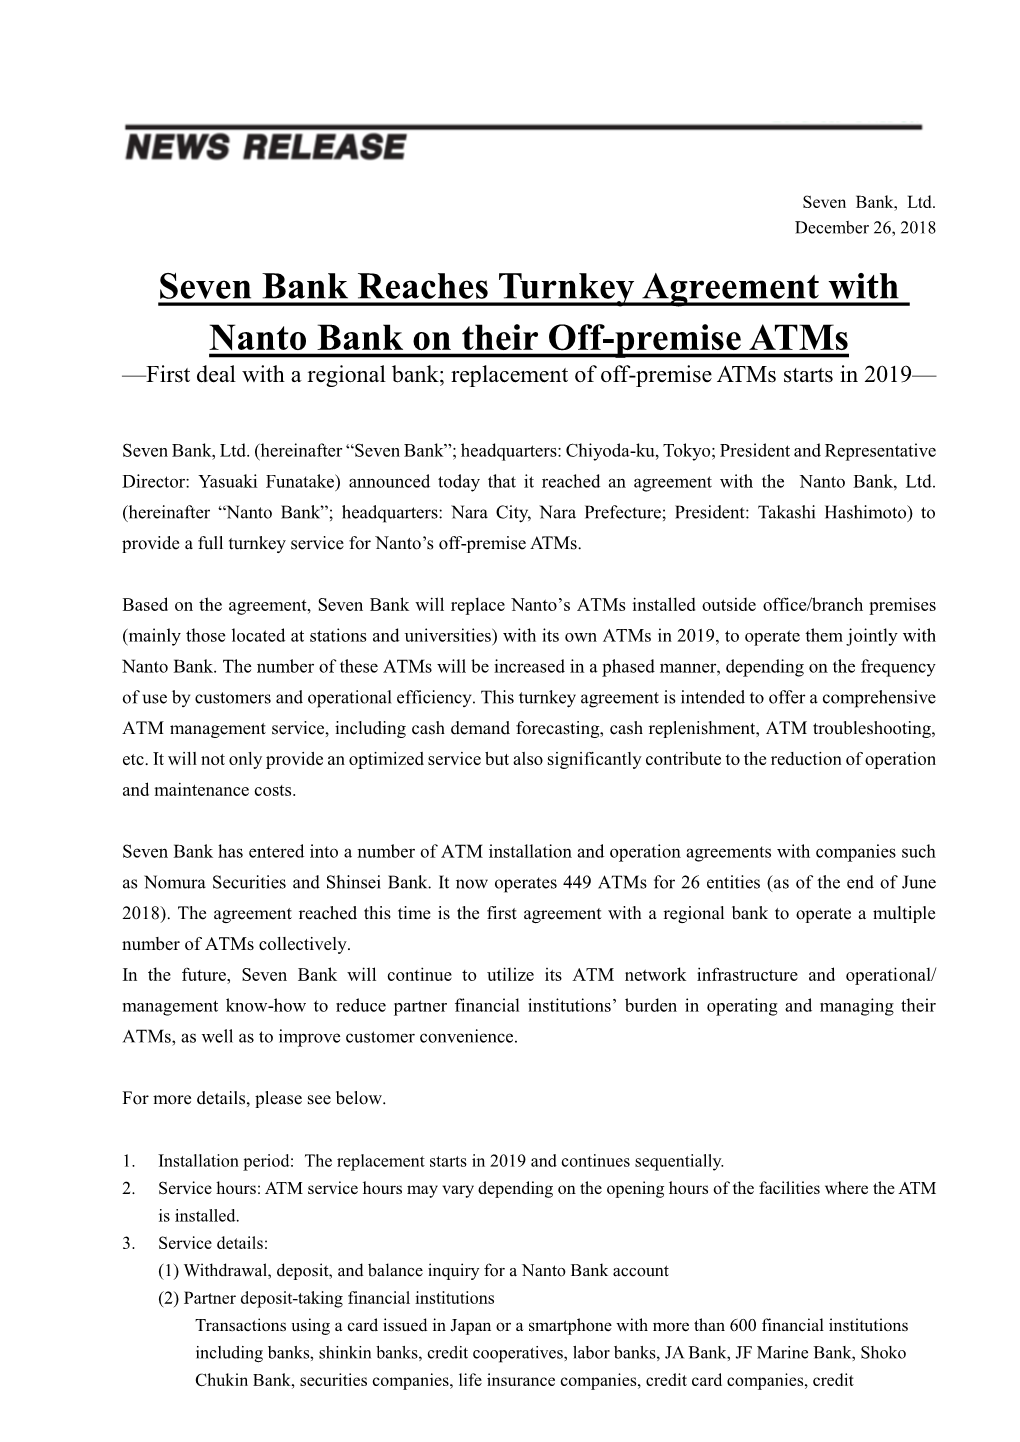 [PDF]Seven Bank Reaches Turnkey Agreement with Nanto Bank On